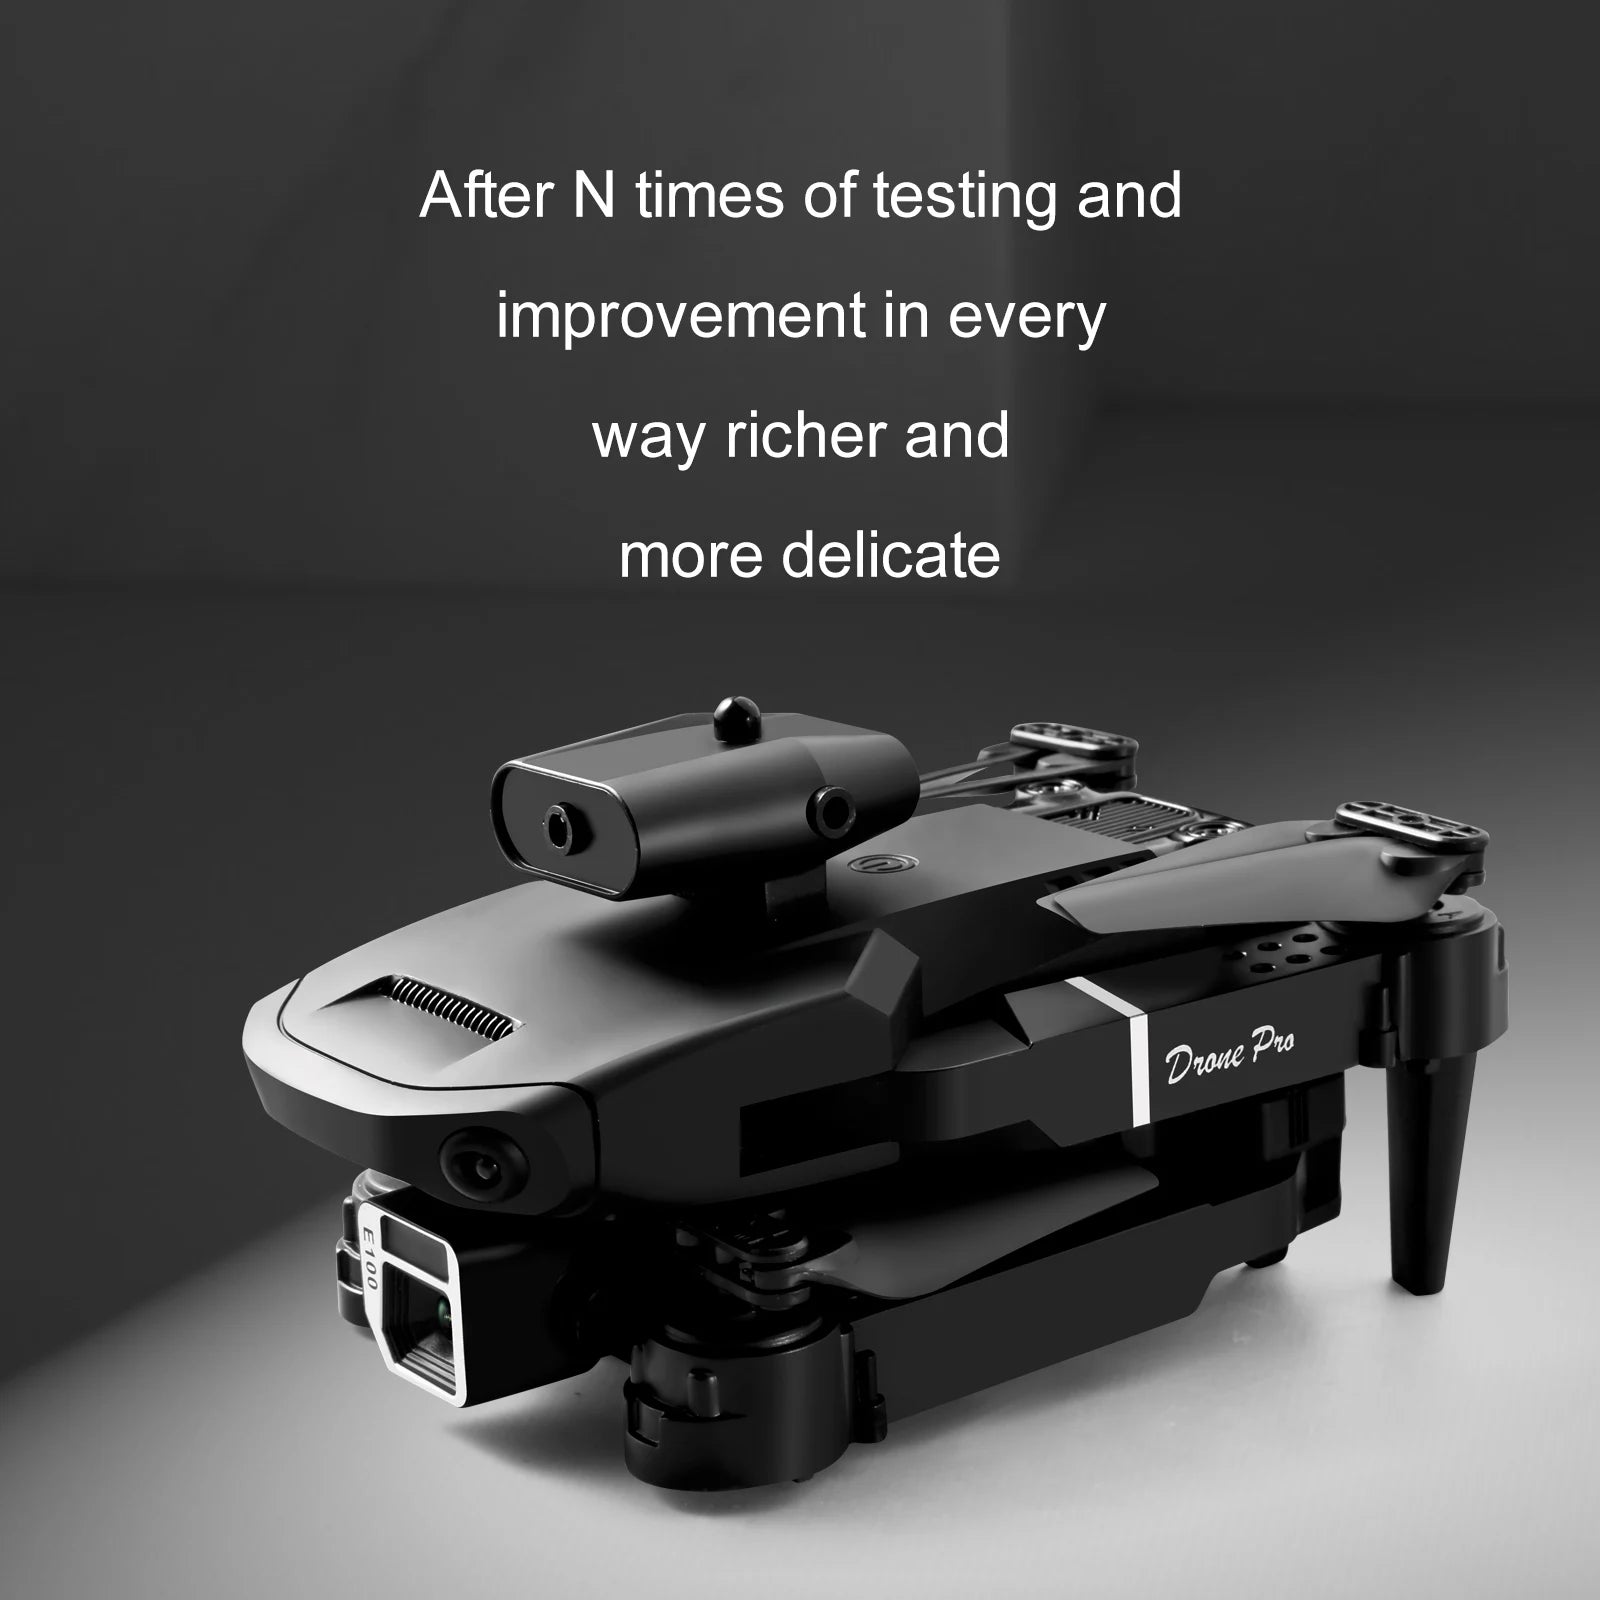 E100 Drone, after n times of testing and improvement in every way richer and